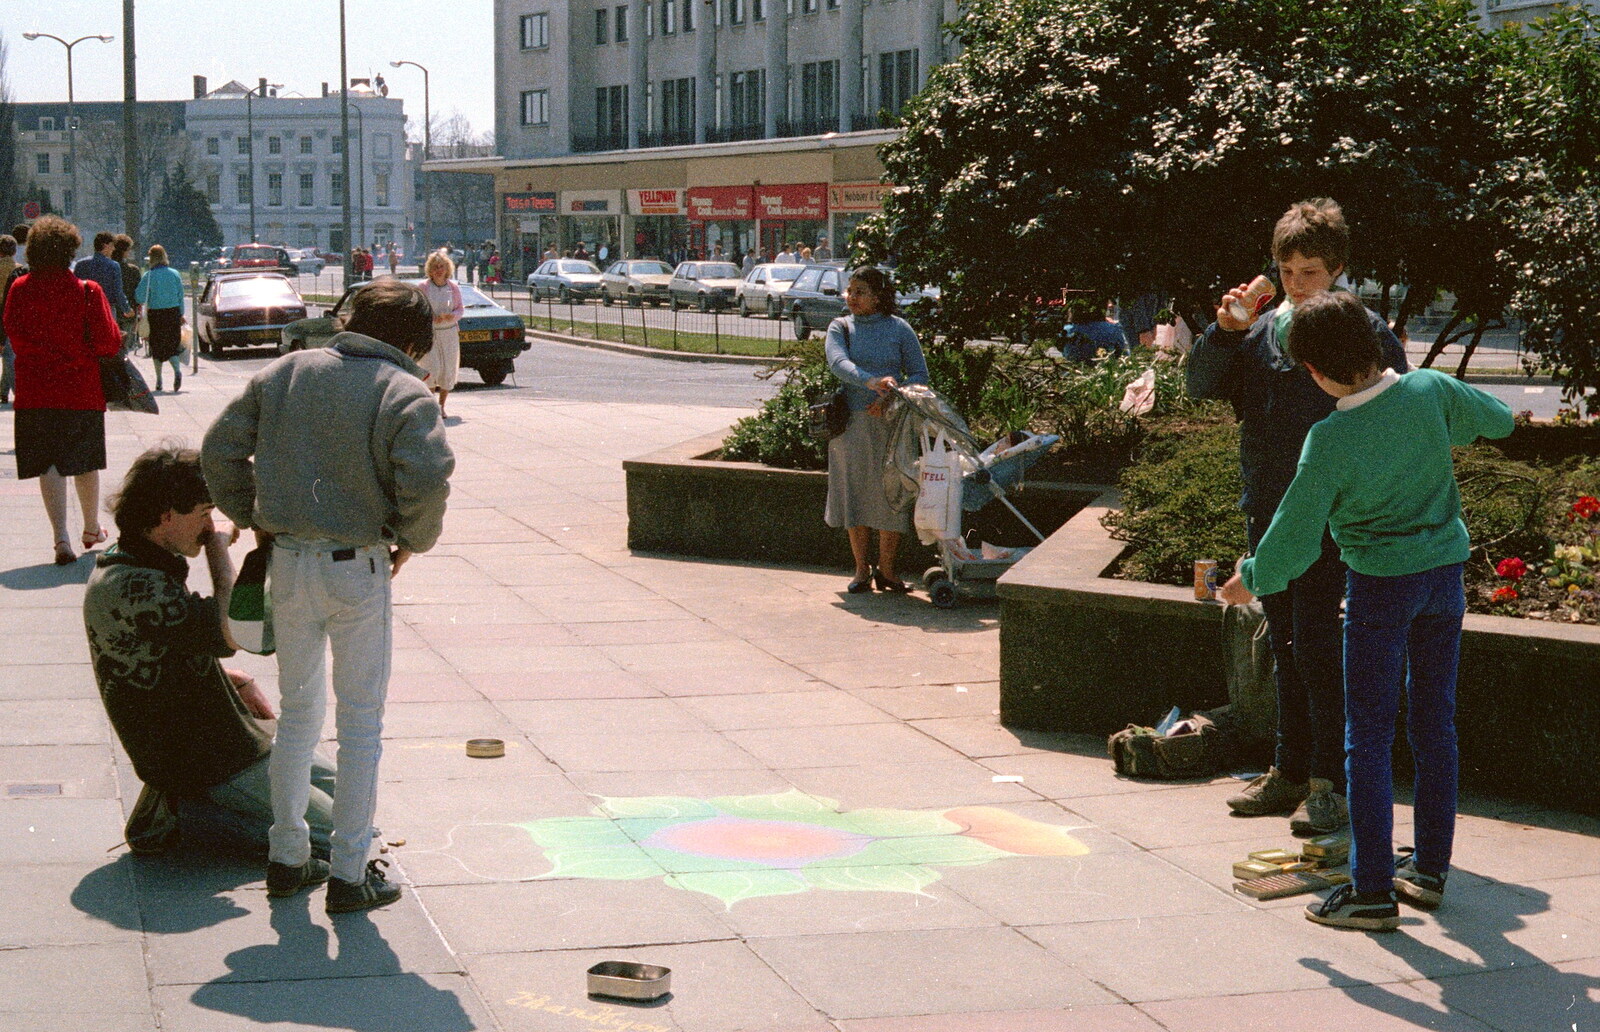 Pavement art on Old Town Street from Uni: A Central Park Fair and City Street Life, Plymouth - 20th October 1985